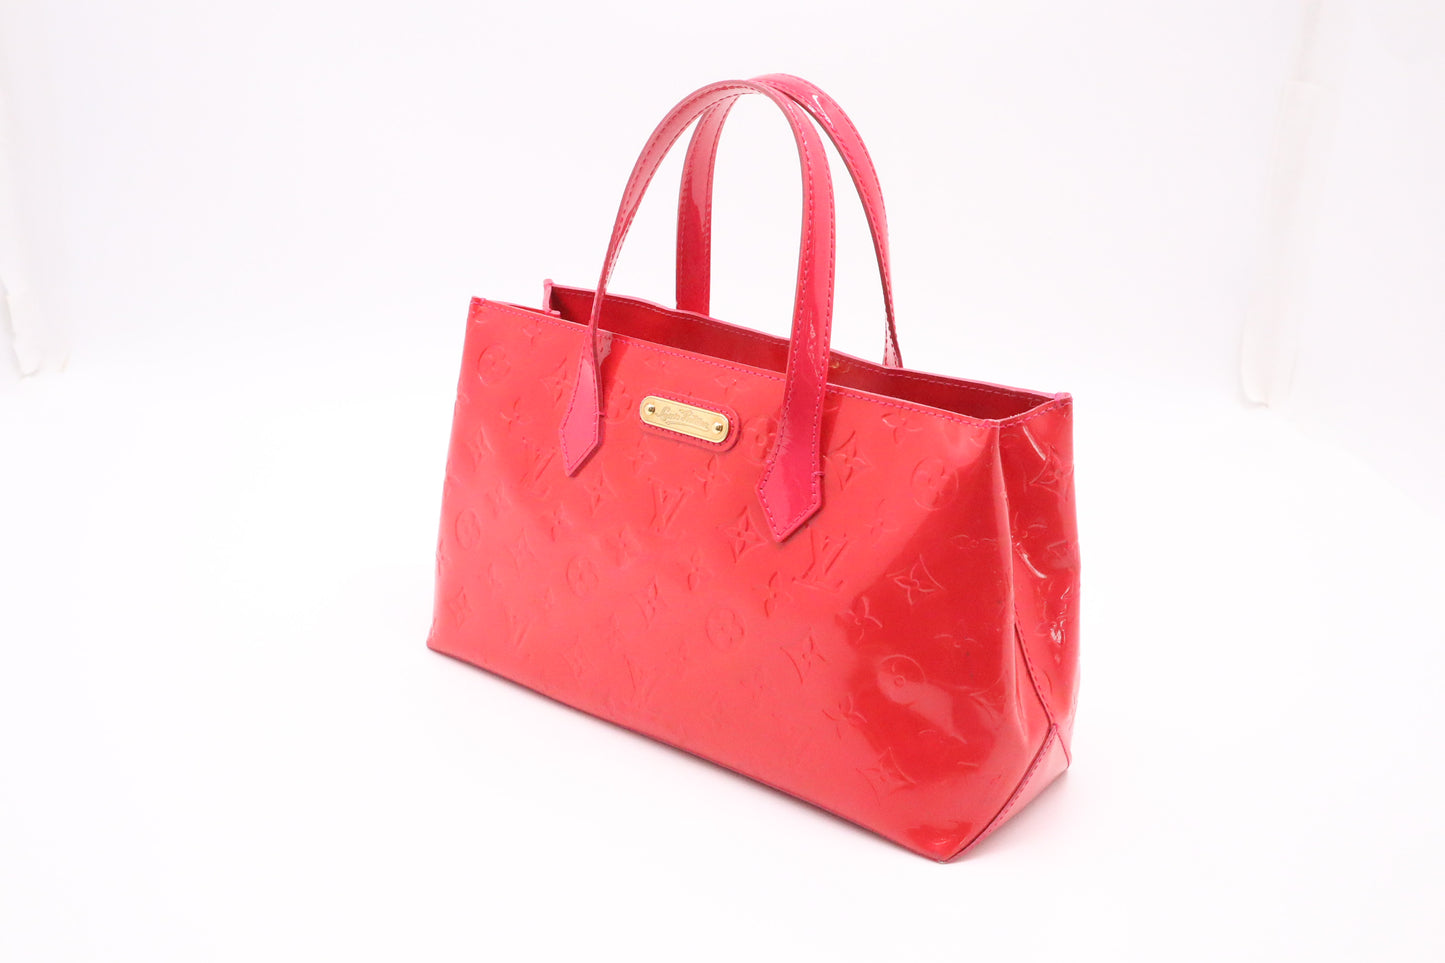 Louis Vuitton Wilshire in Framboise Patent Leather